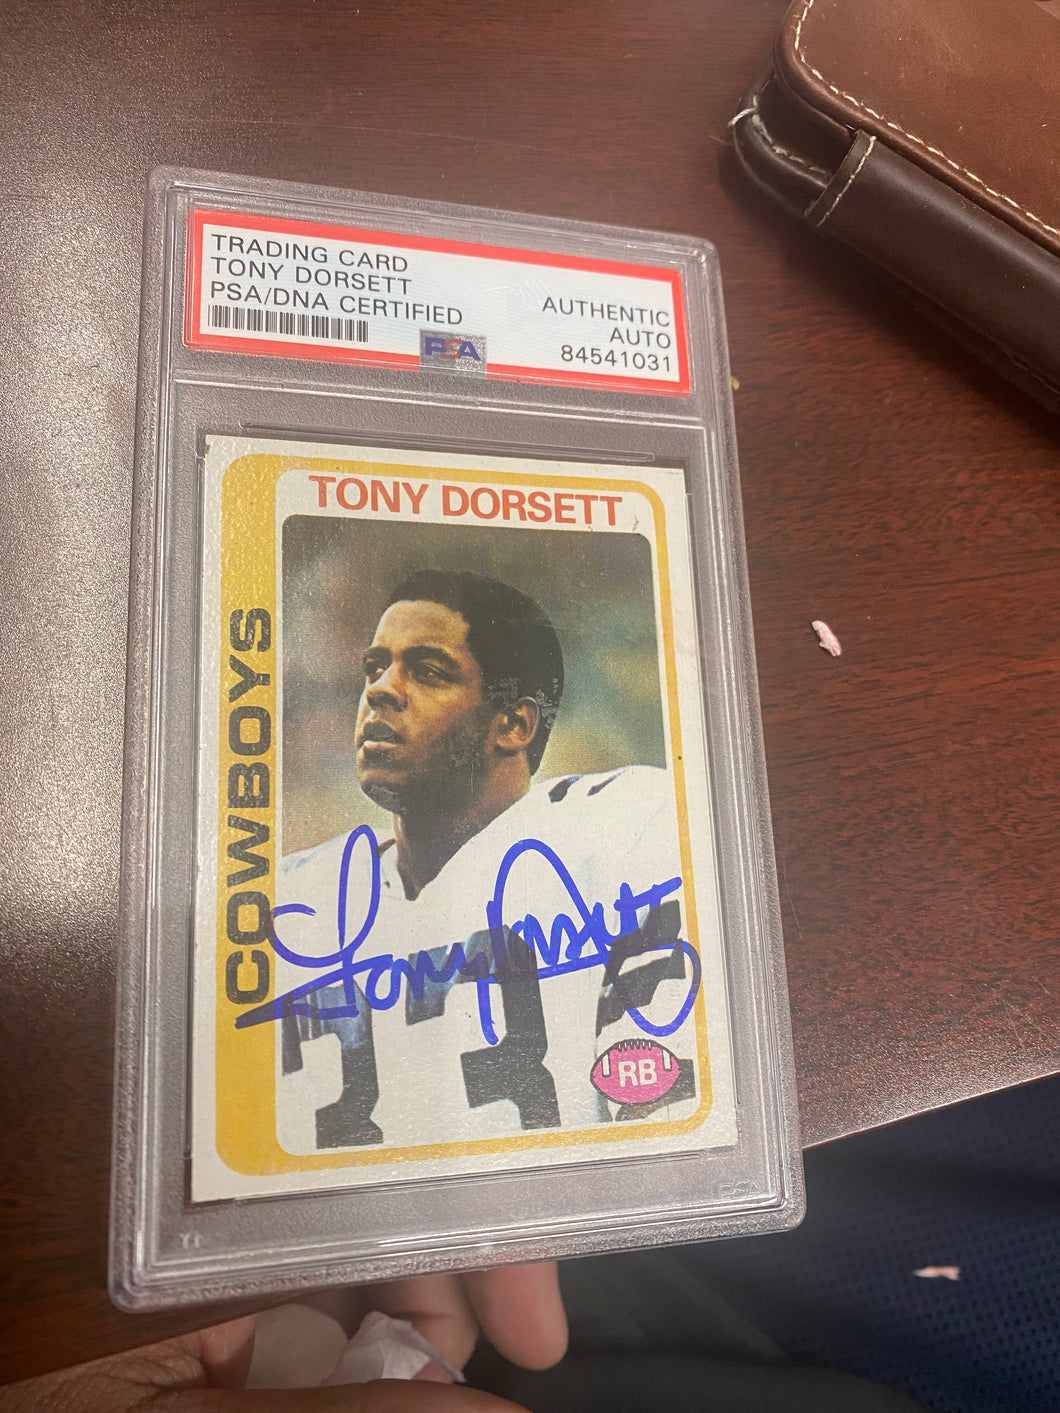 1978 topps rookie card Dallas Cowboys Tony Dorsett authentic autographed psa/dna authenticated